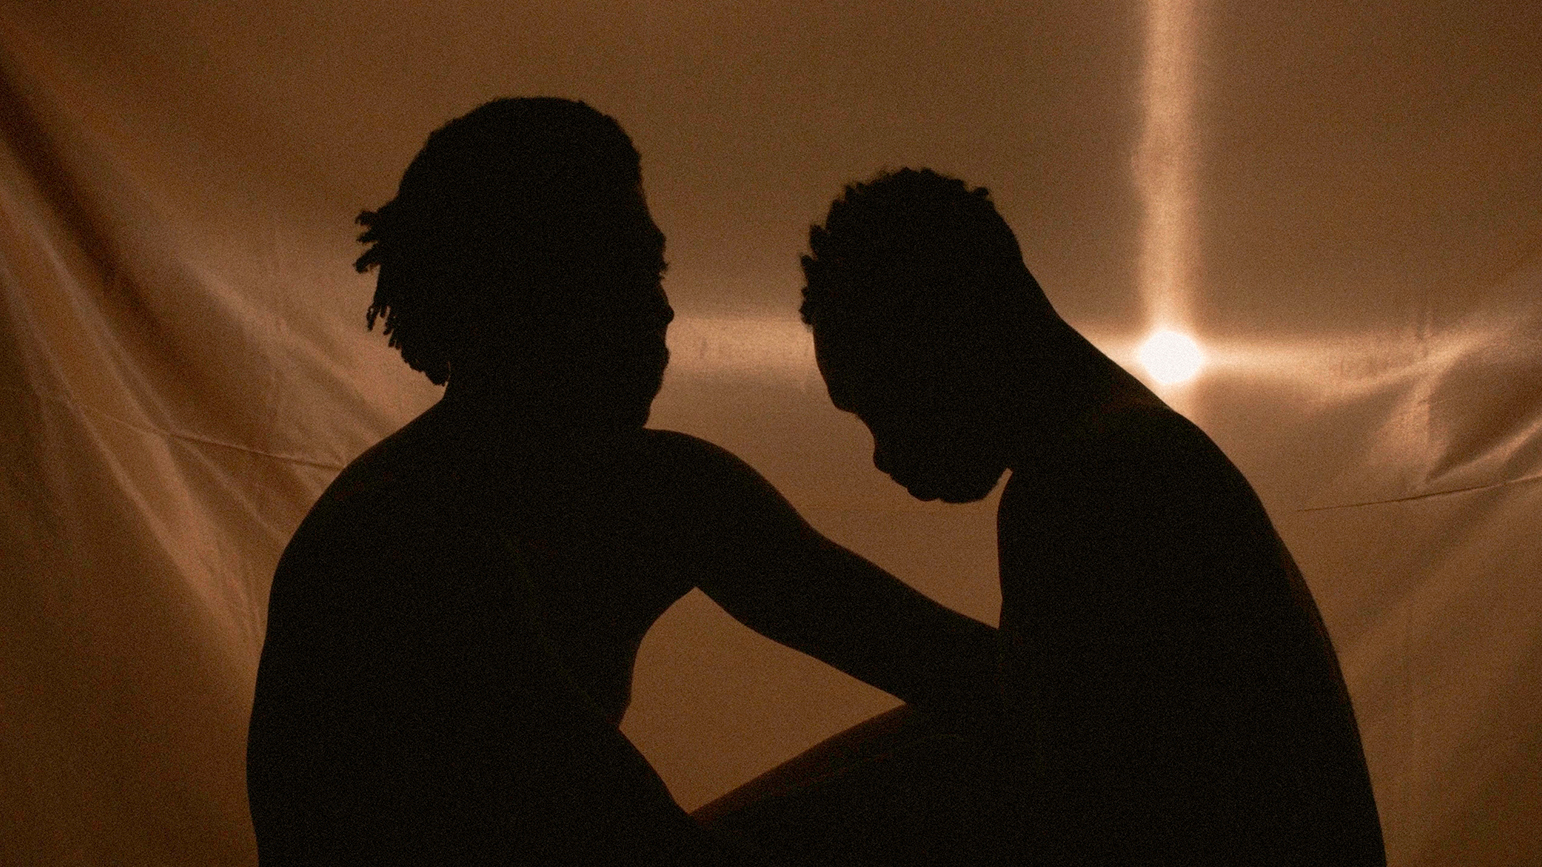 Image of two silhouettes sitting facing one another against a backlit gold cloth